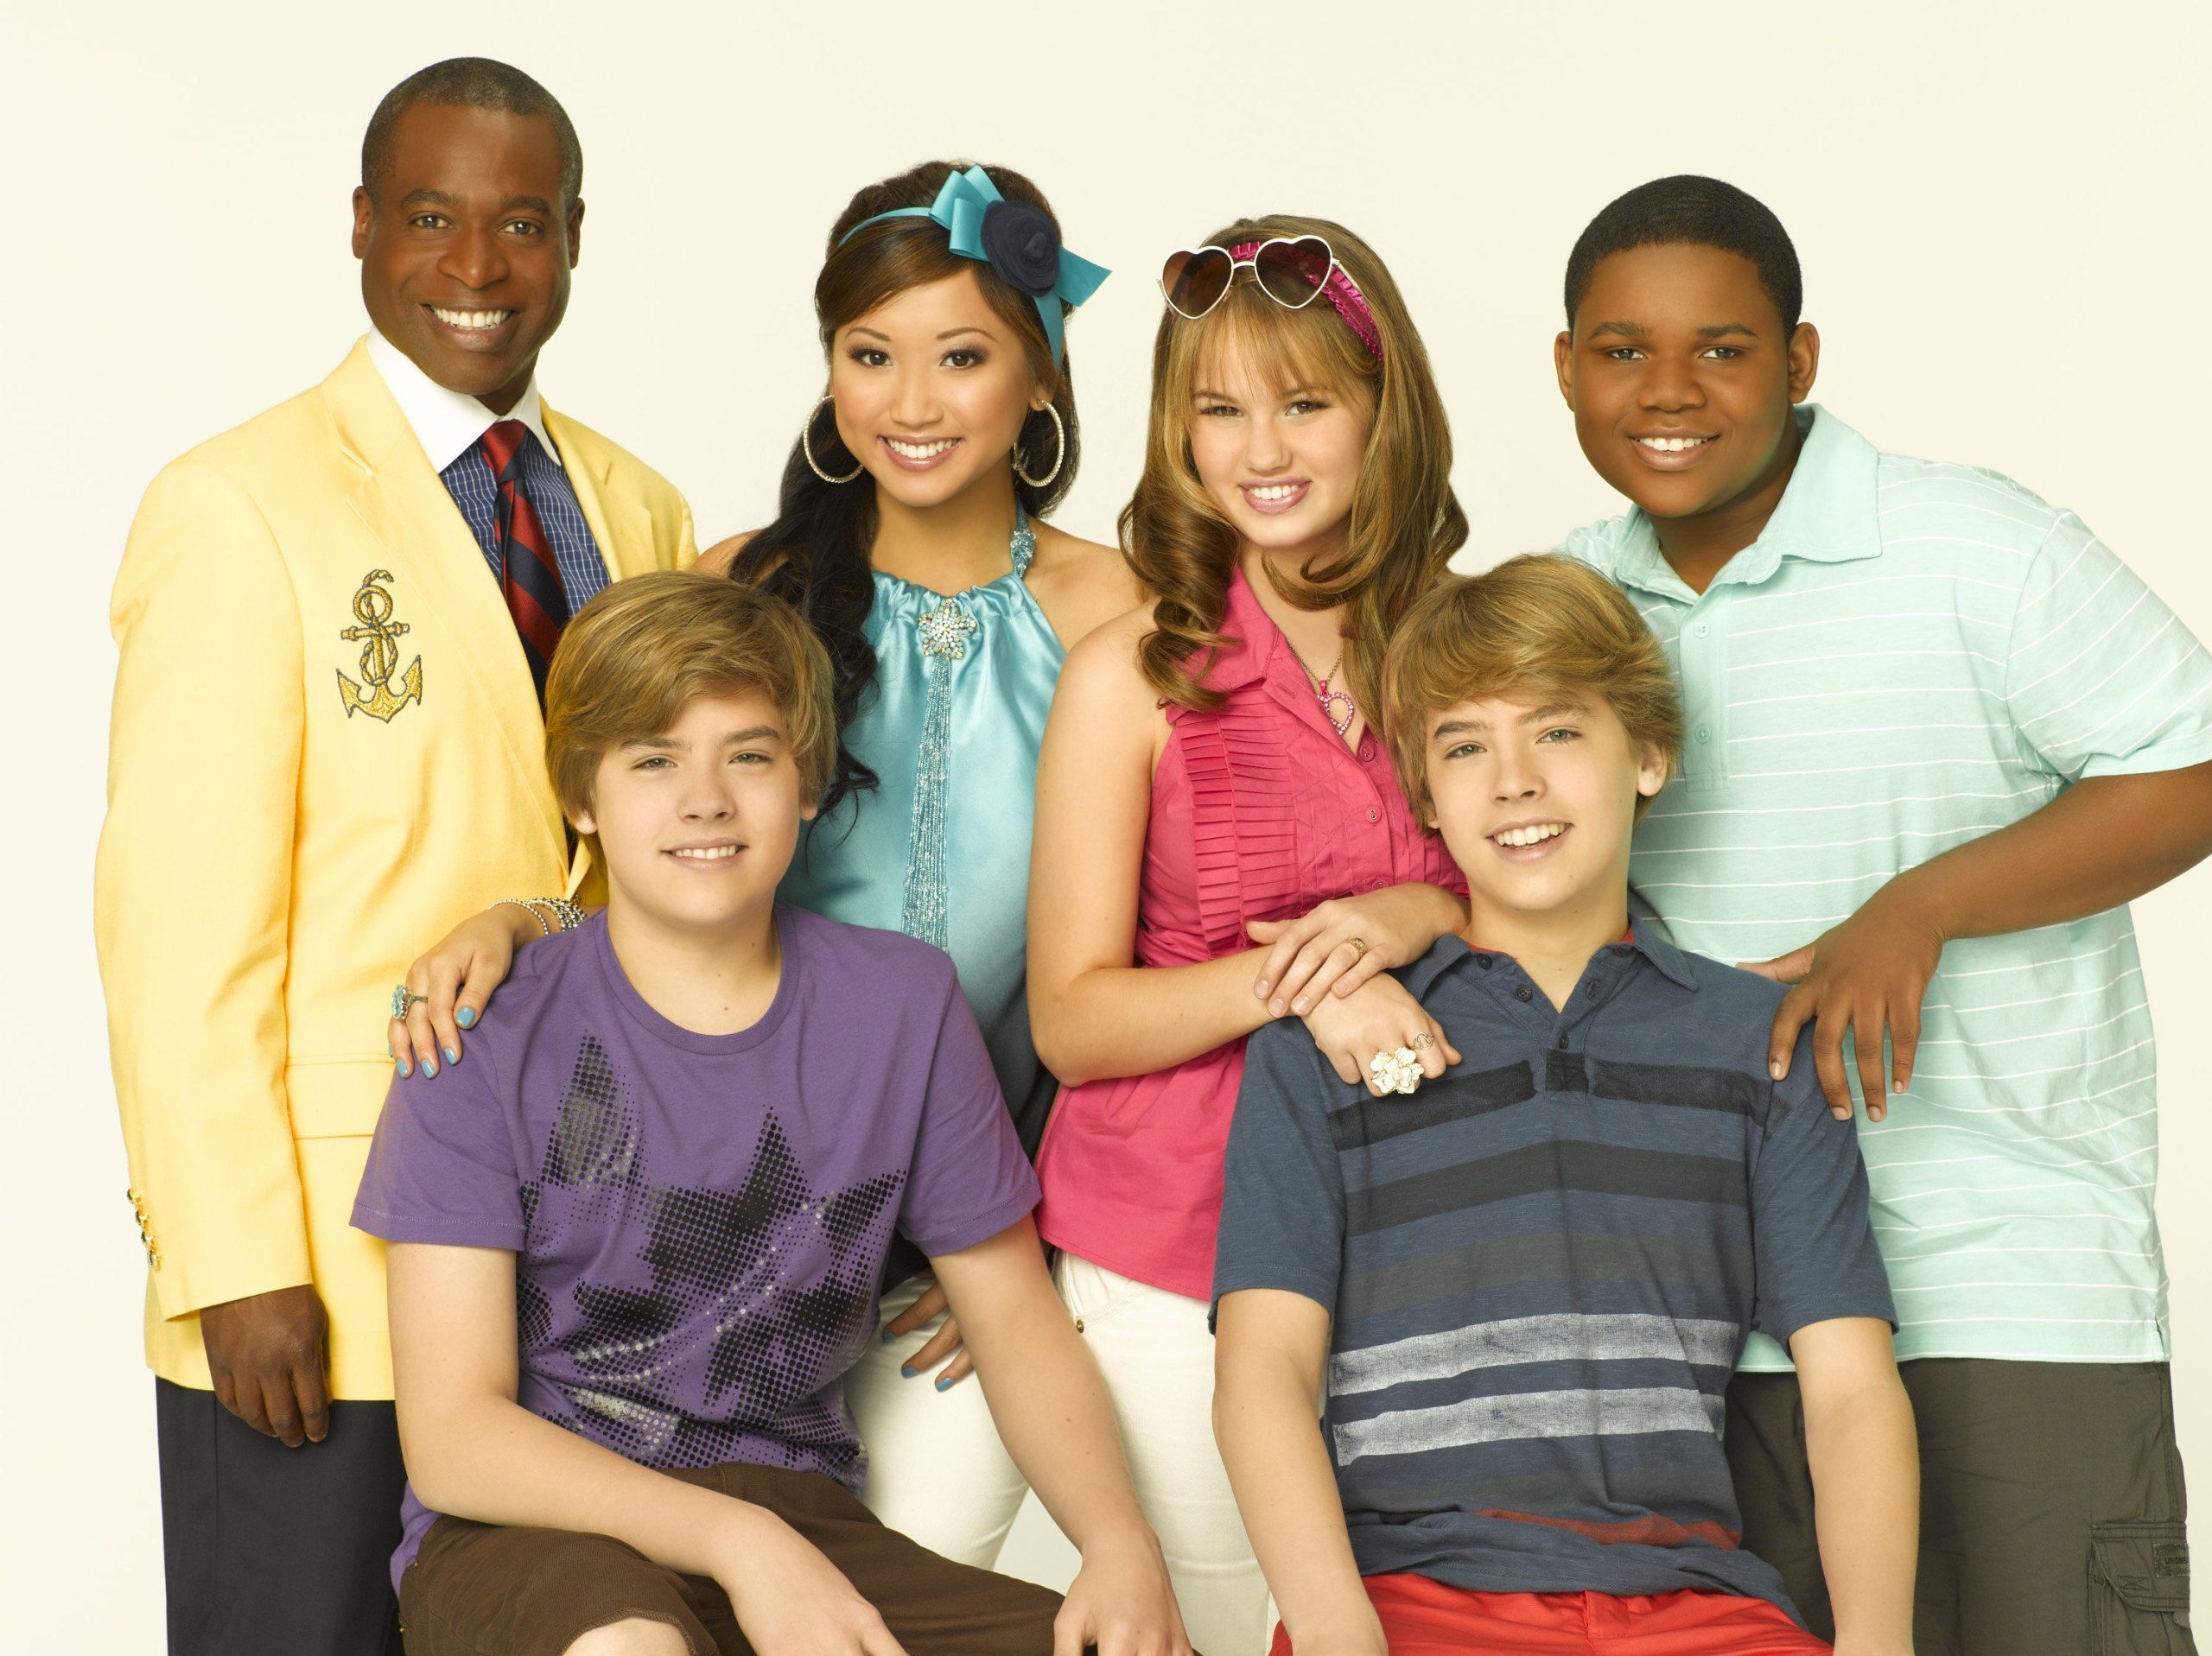 suite life of zack and cody season 3 episode 19